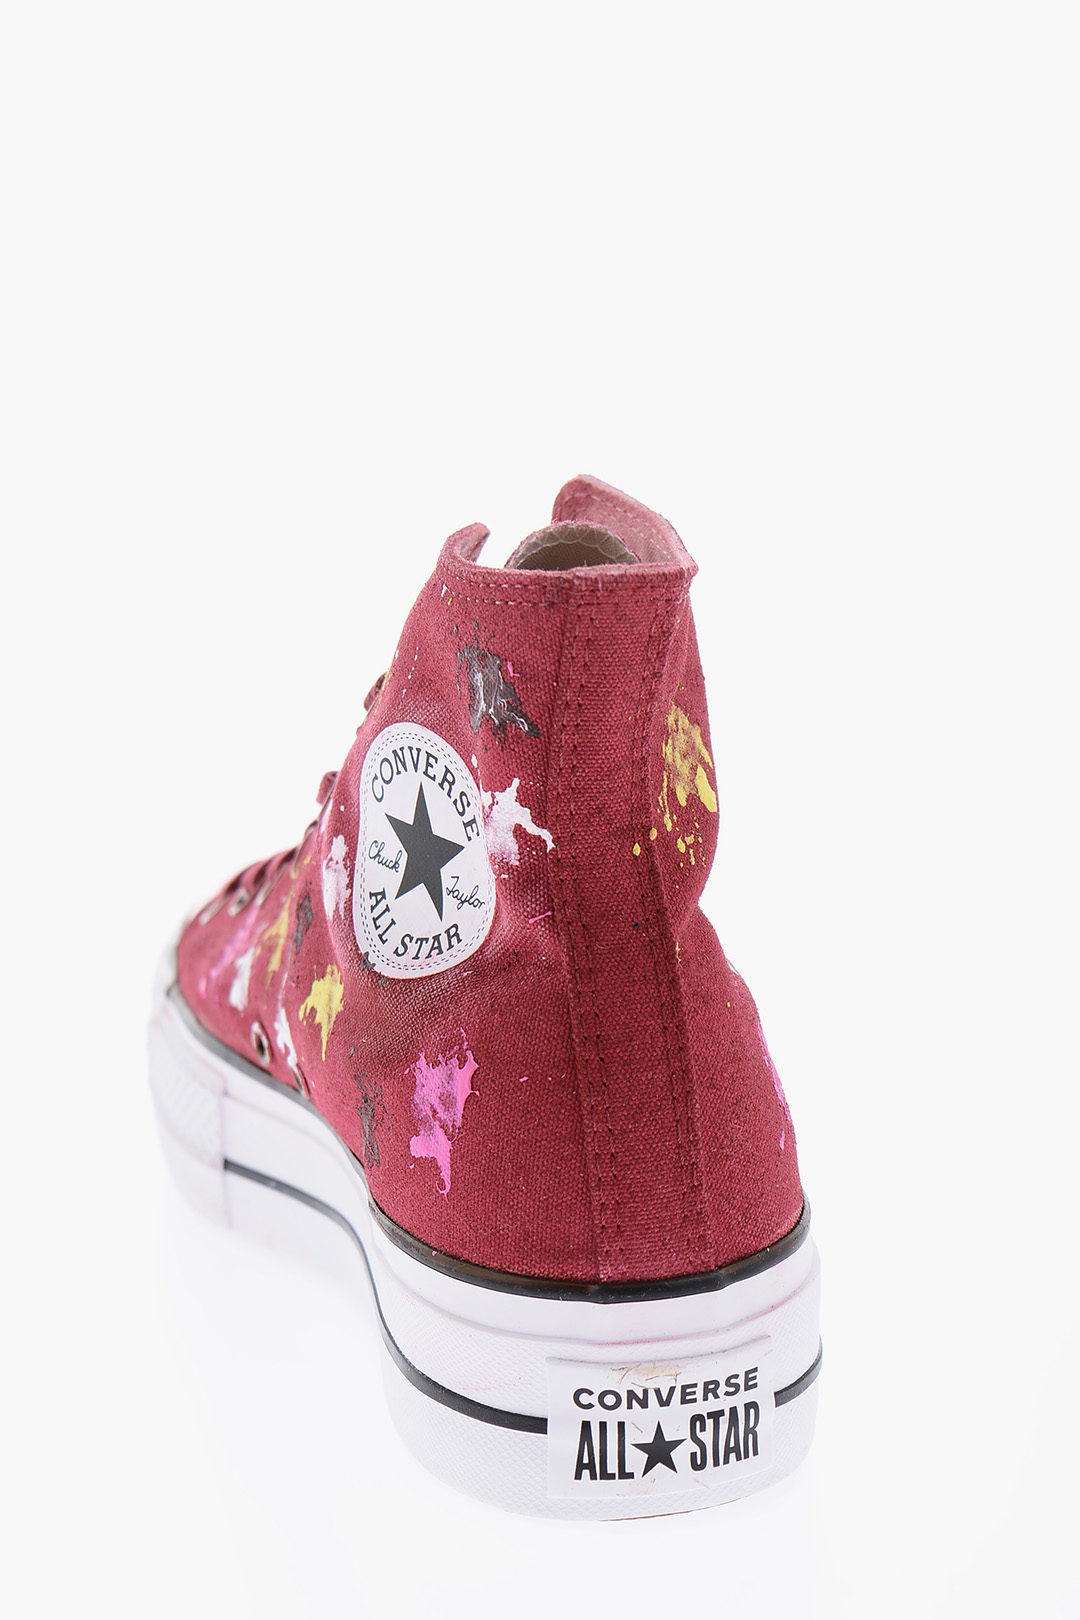 Converse ALL STAR CHUCK TAYLOR 4 cm Painting Effect Sneakers women -